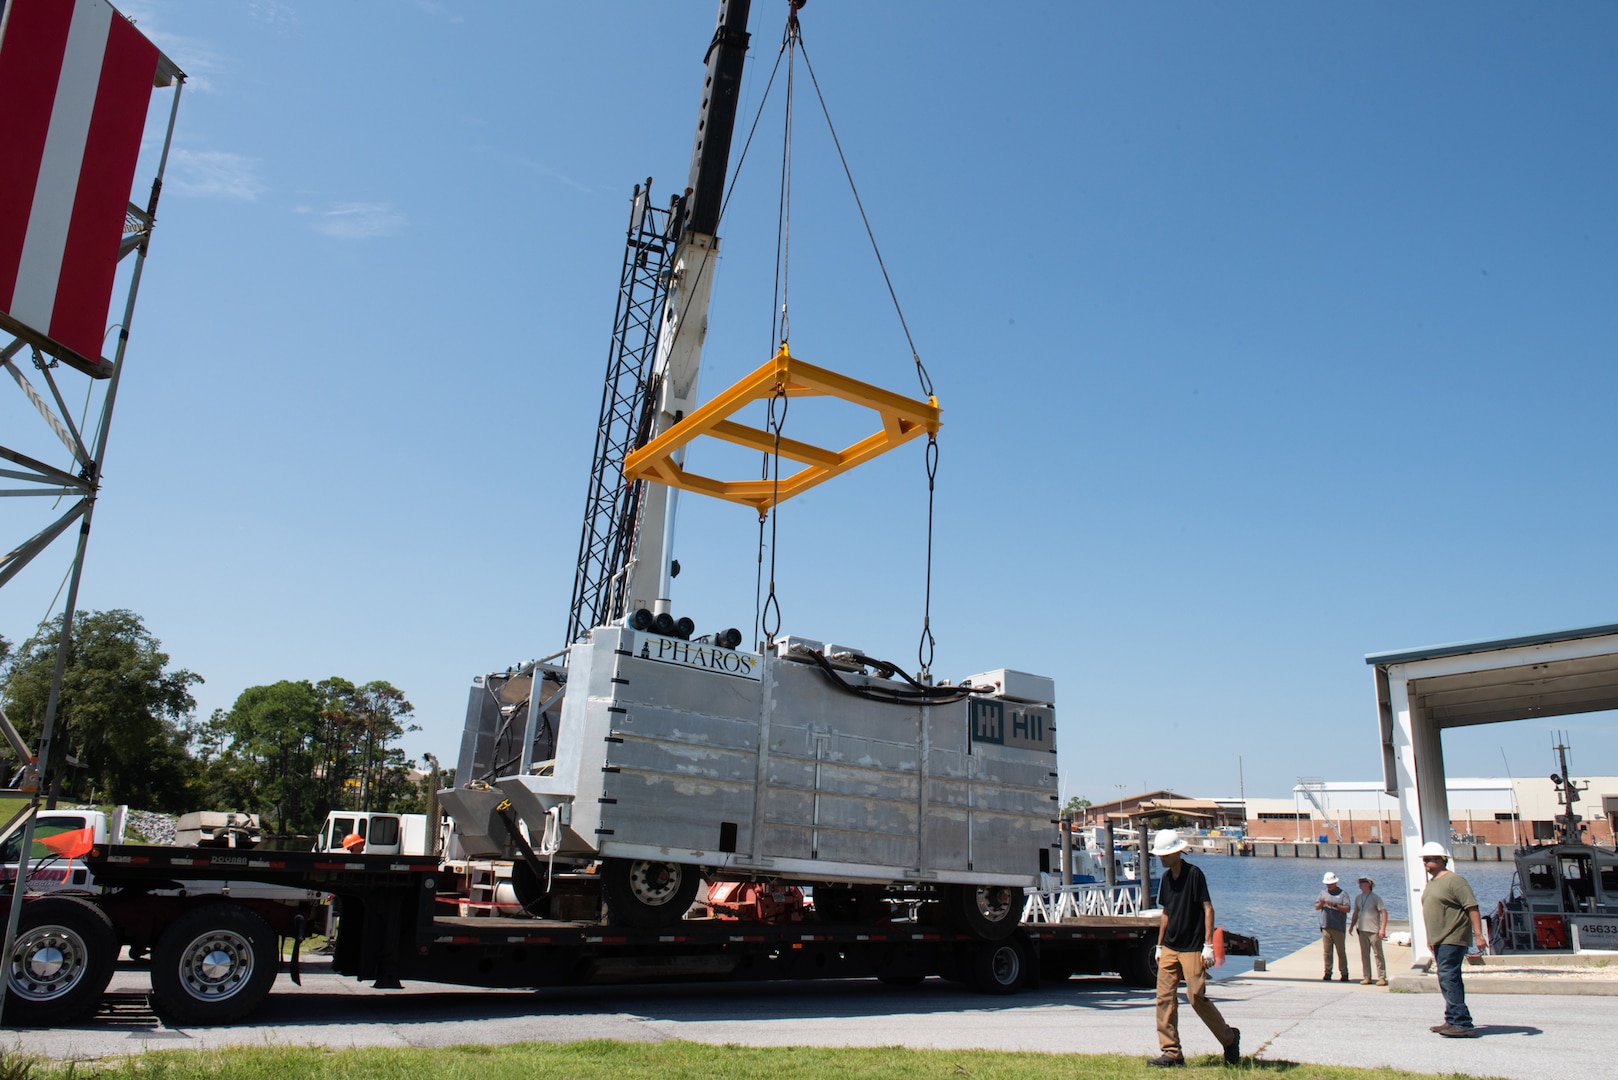 A crane prepares to lift the HII Pharos launch and recovery system from a trailer before launching it down the boat ramp at Naval Support Activity Panama City, Fla., Sept. 1. Naval Surface Warfare Center Panama City Division and HII entered into a Cooperative Research and Development Agreement to help demonstrate several of the system’s capabilities prior to its shipping to Naval Undersea Warfare Center (NUWC) Division Newport. (U.S. Navy photo by Ronnie Newsome)